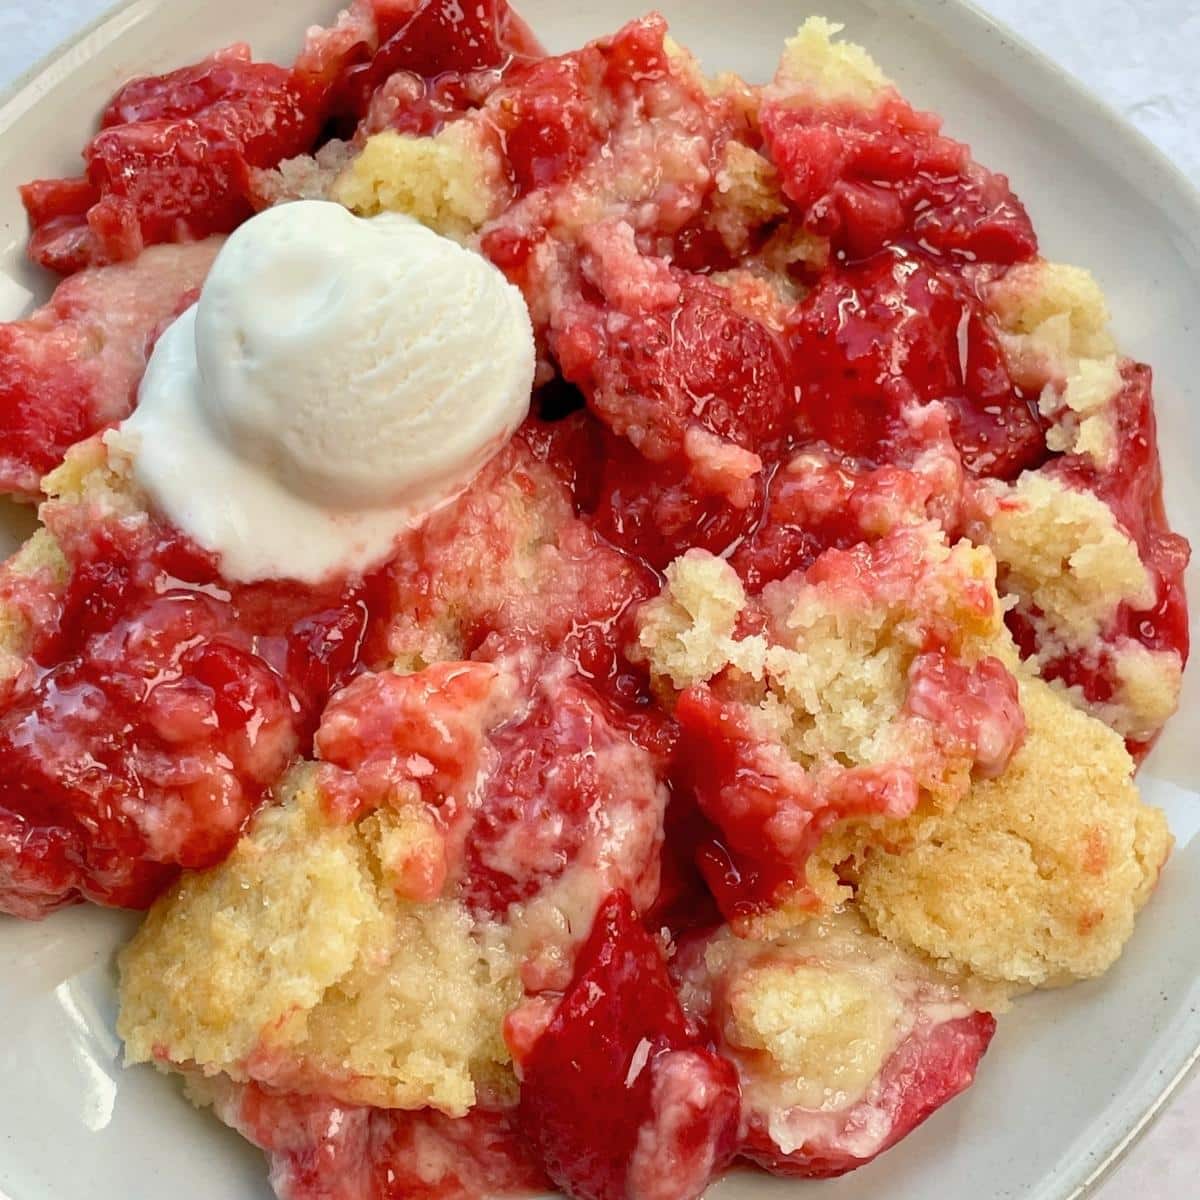 A plate of vegan strawberry cobbler with ice cream on top.